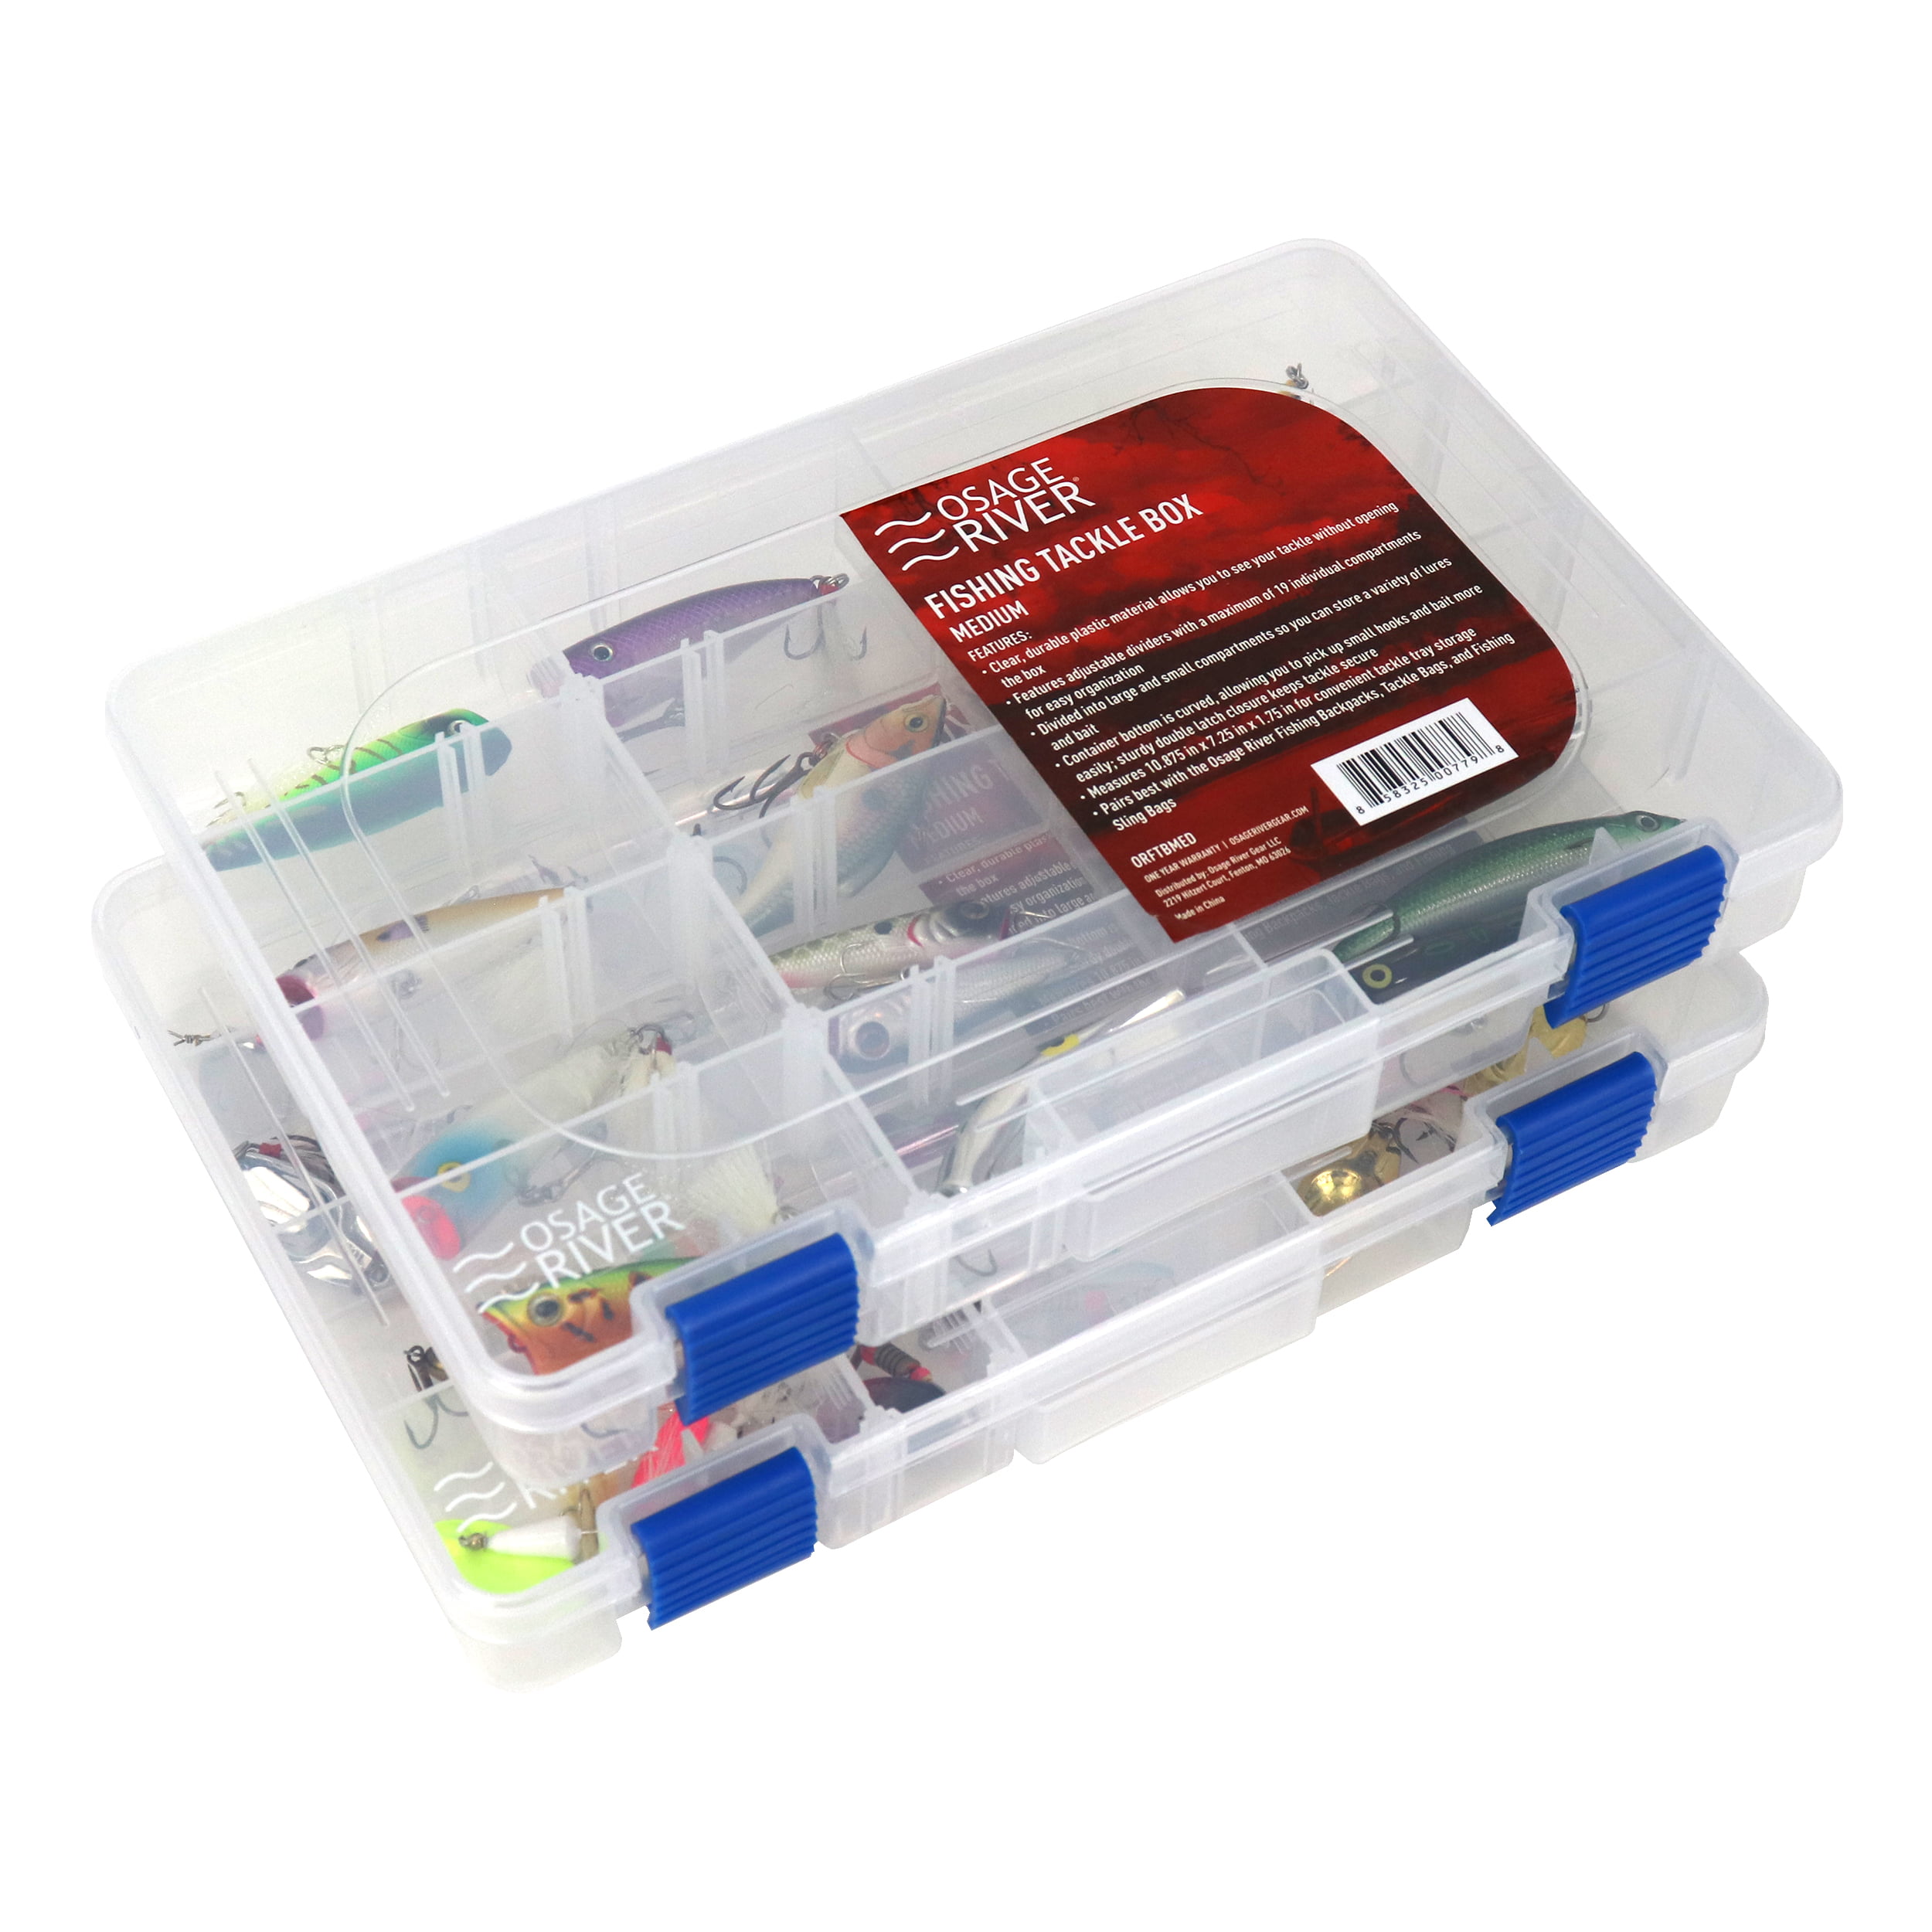 Tackle Box Fishing Tackle Boxes Organizer 2 Pack Plastic Compartment Organizer B